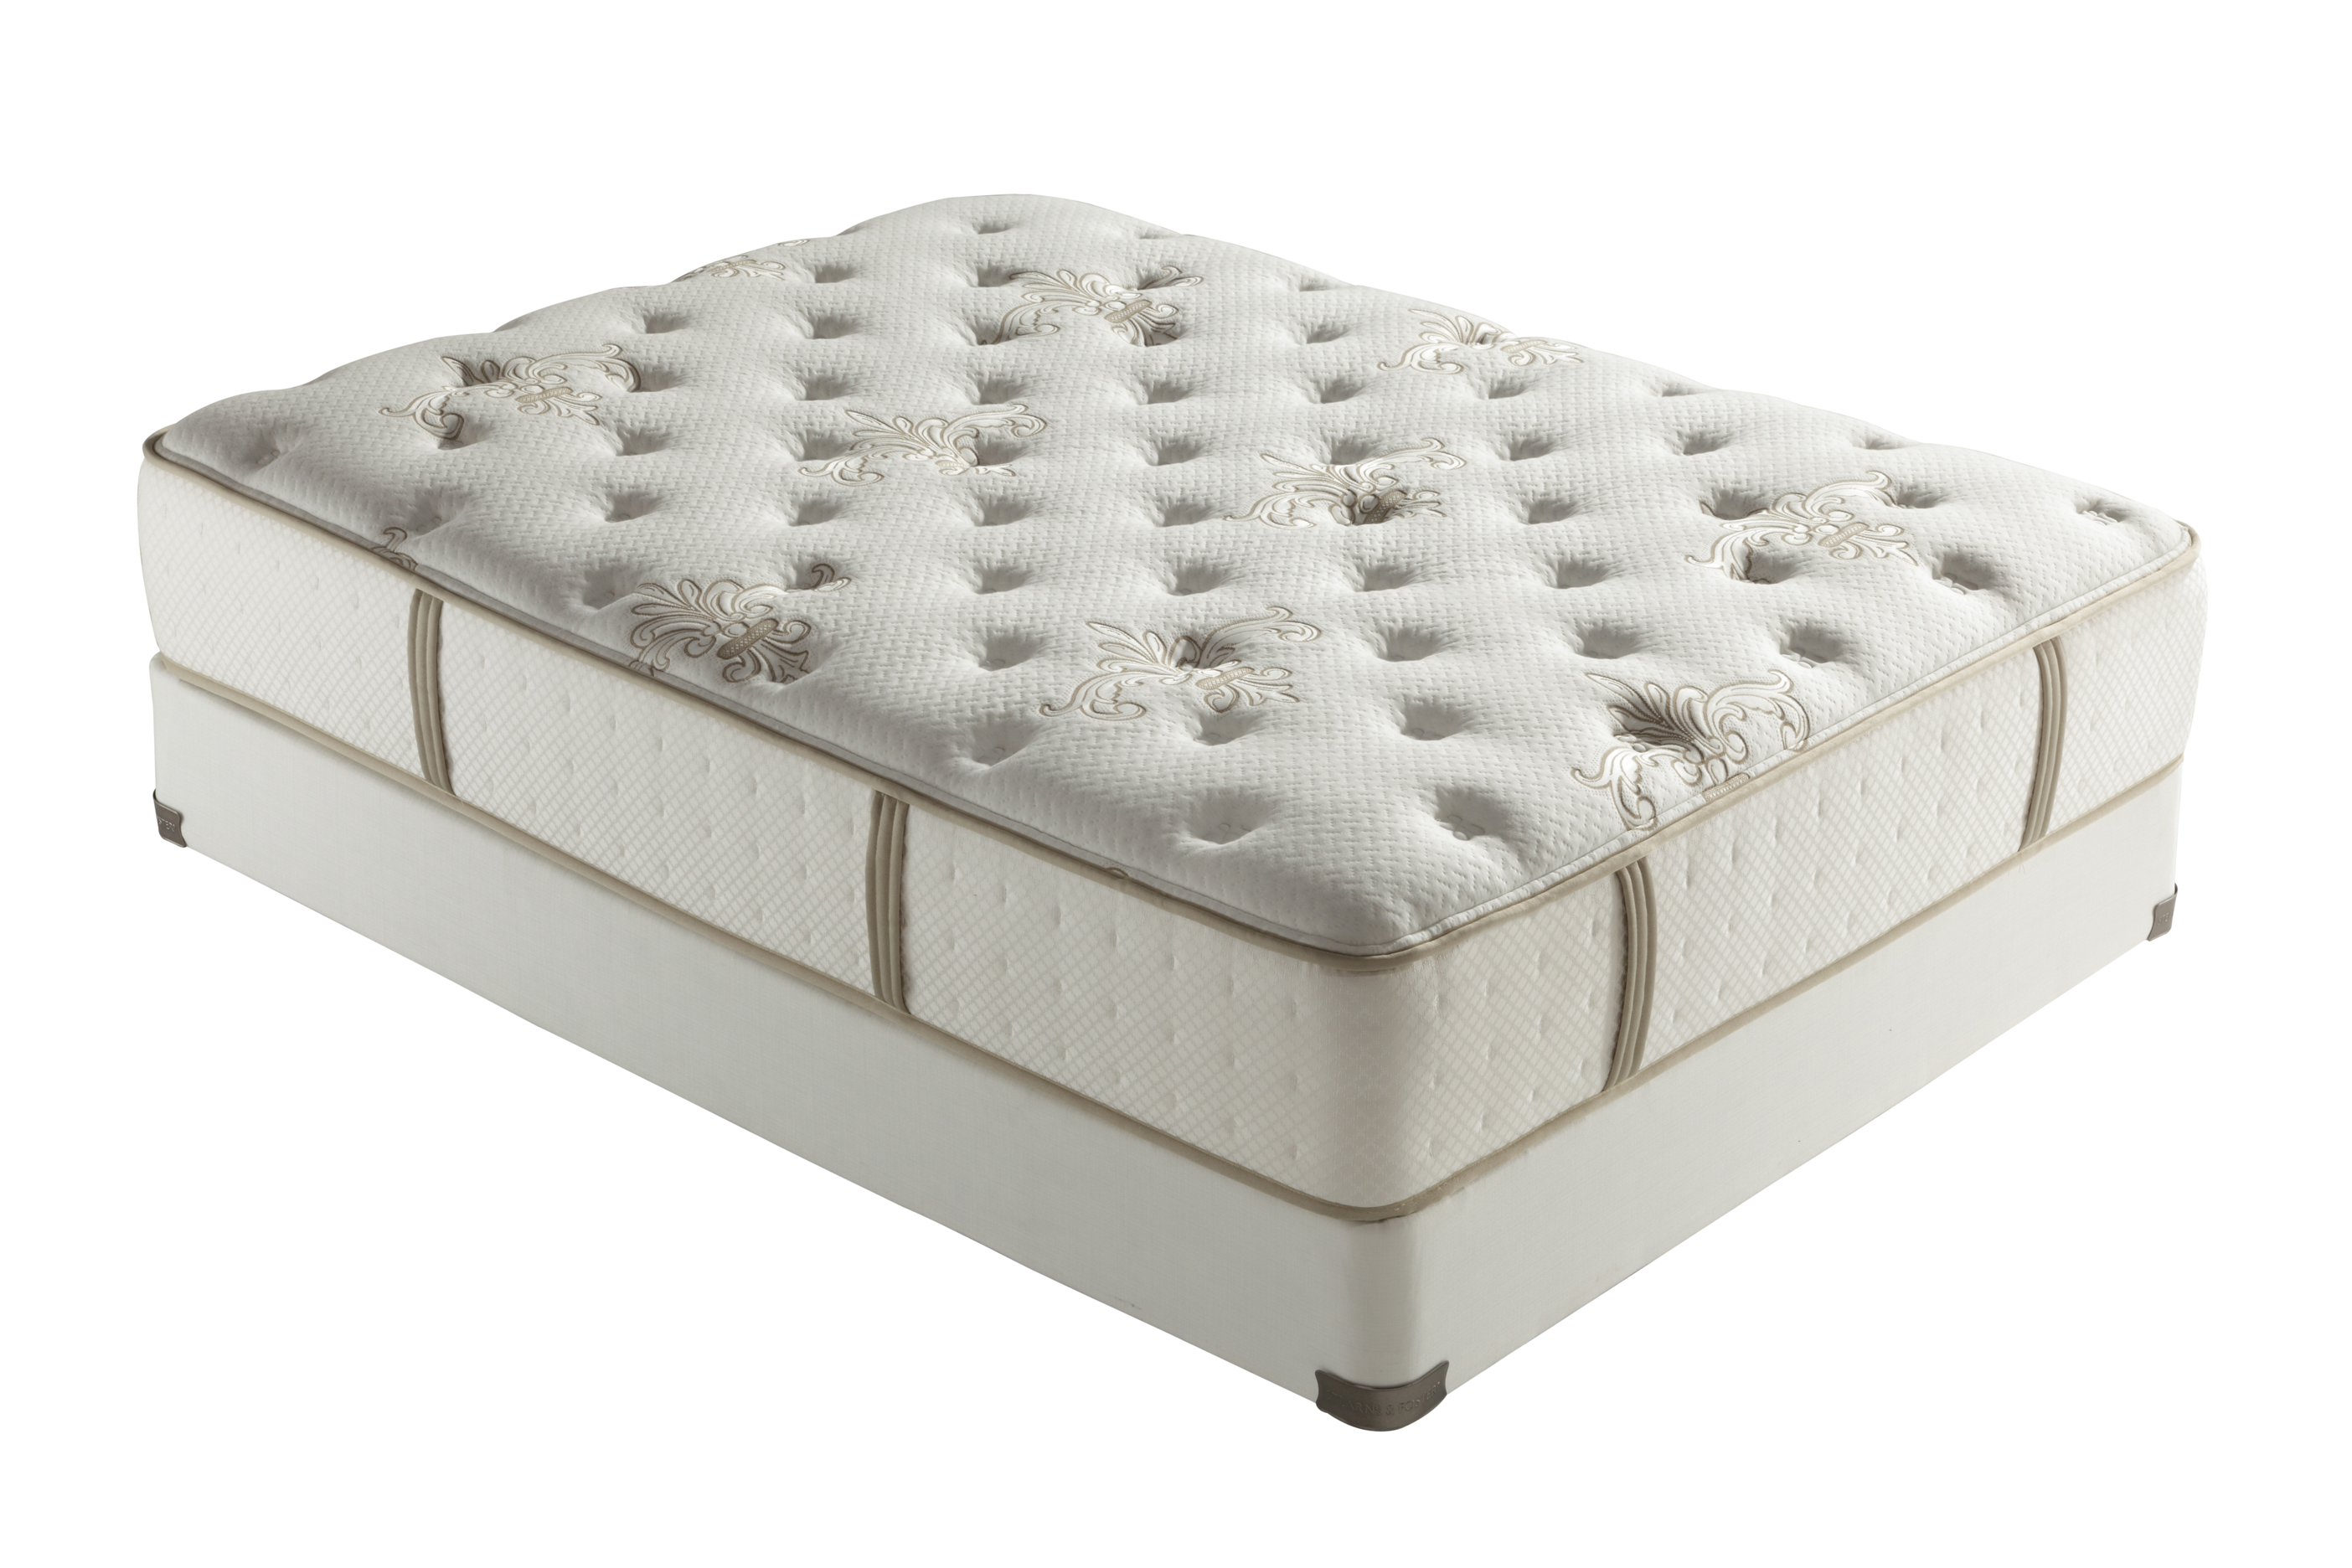 stearns & foster mattresses prices